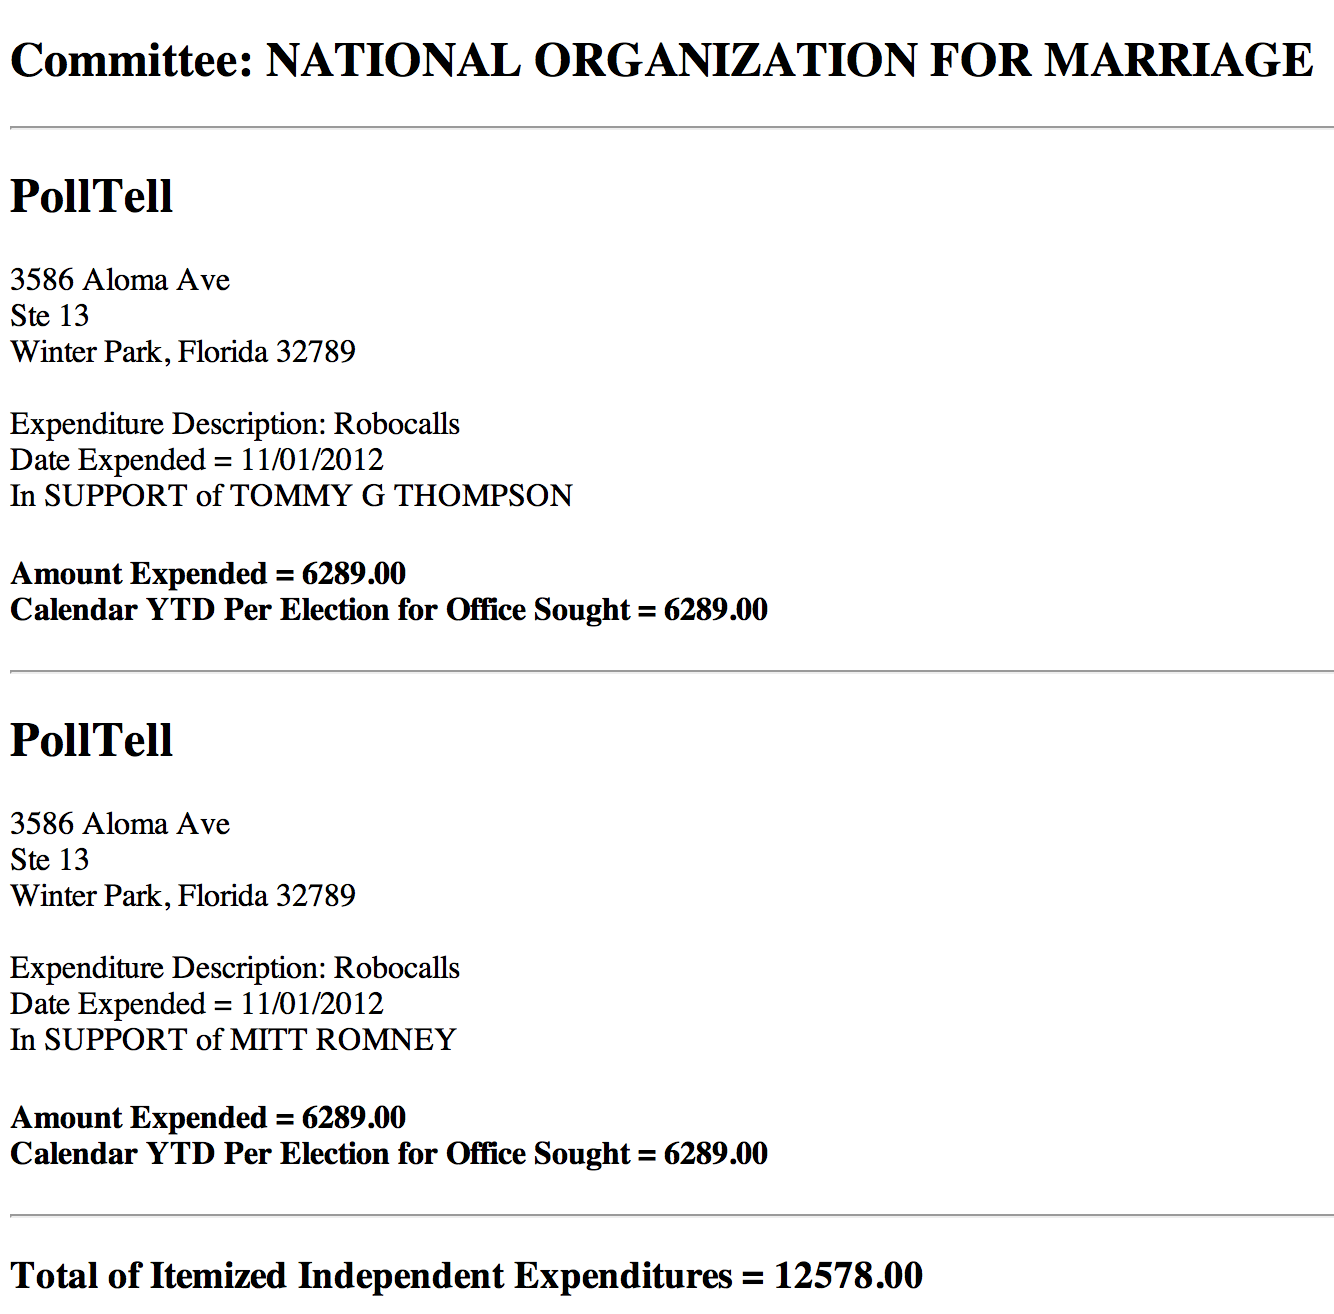 NOM; National Organization for Marriage